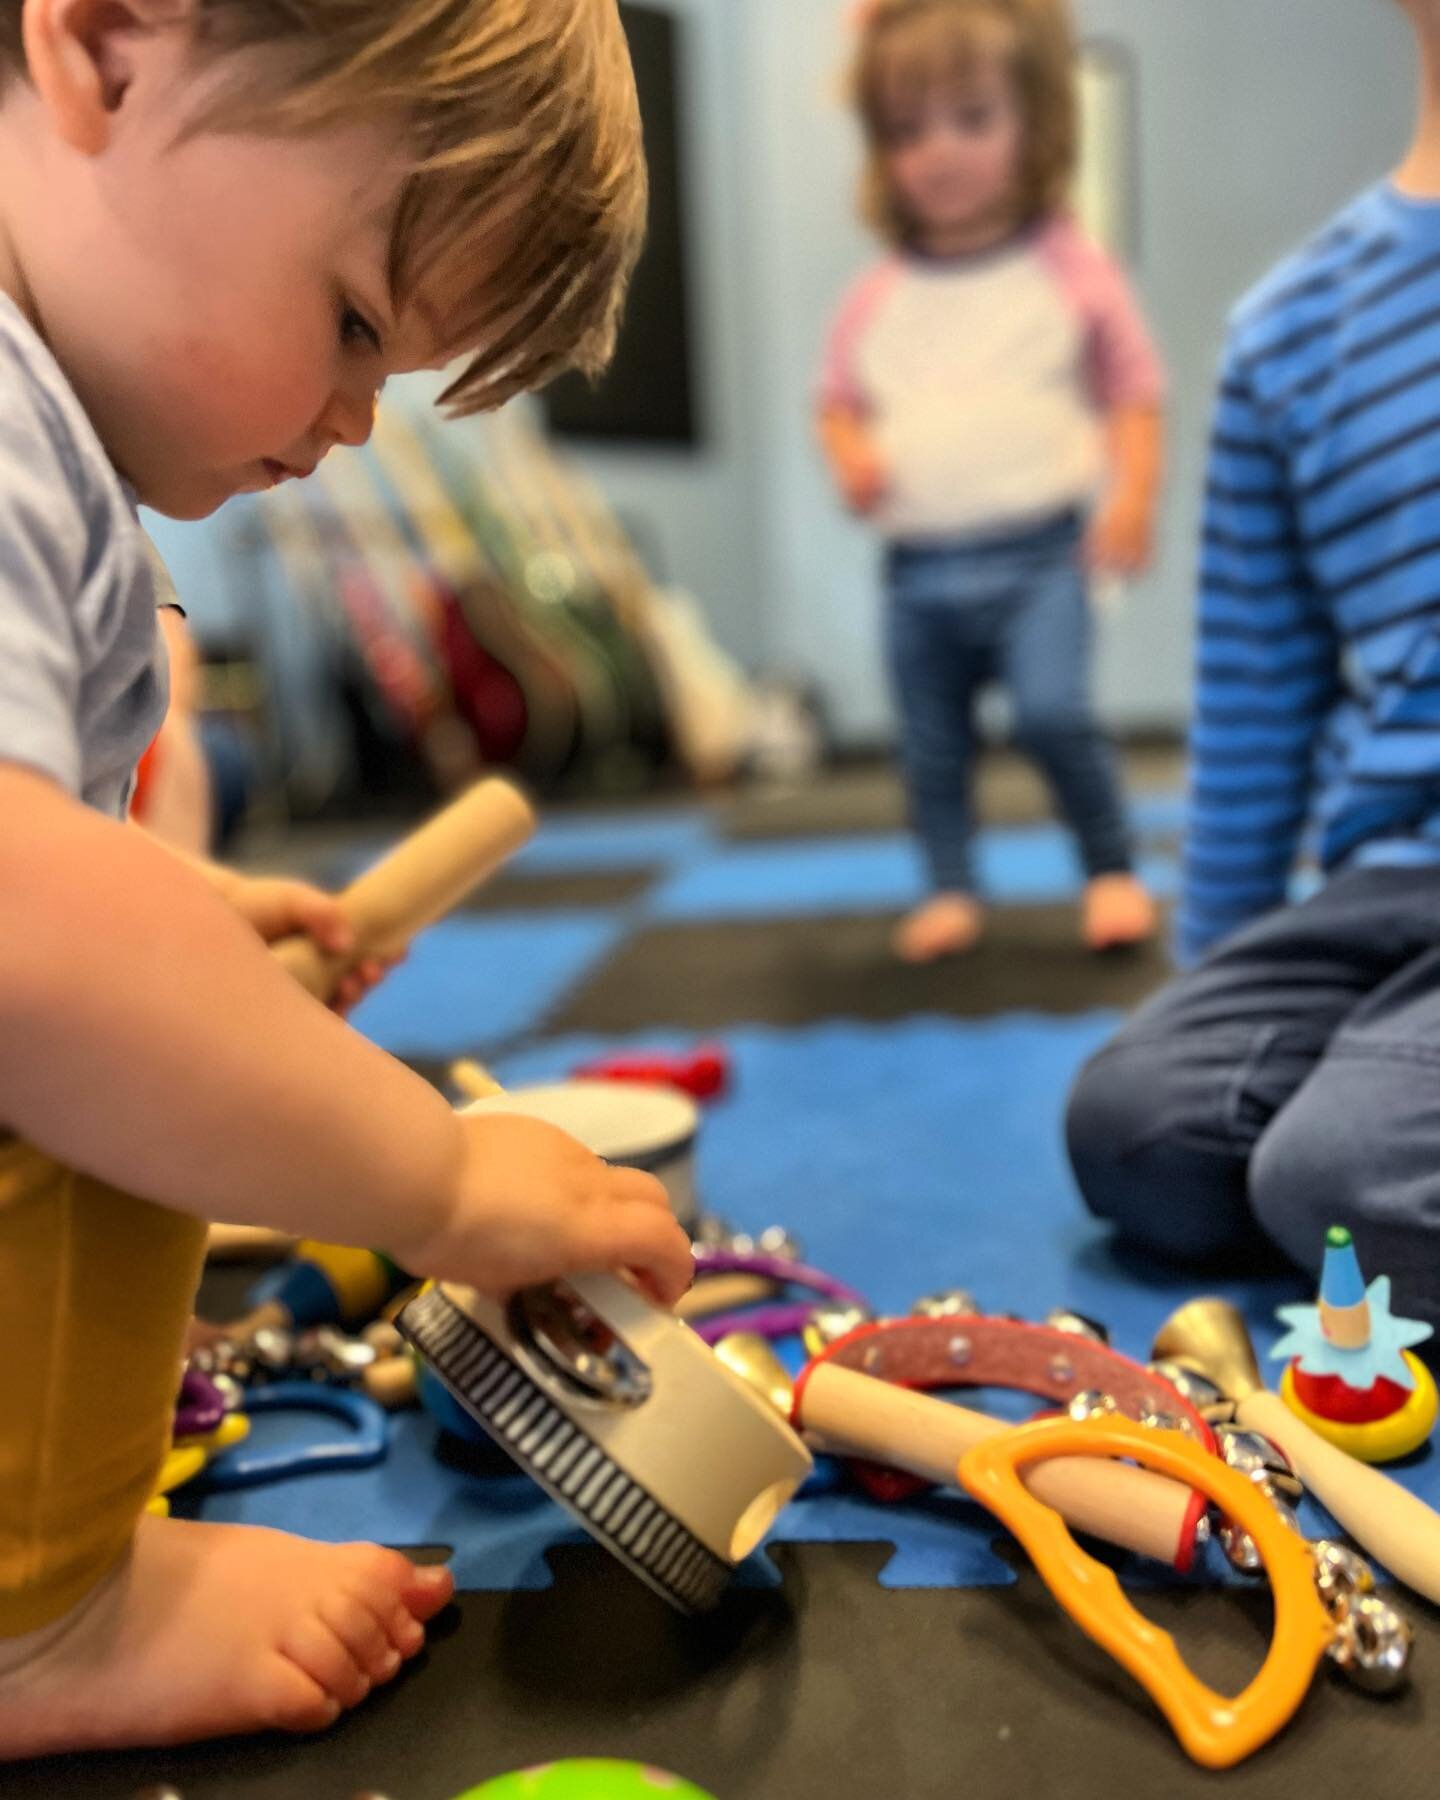 One more #thursdayfunday with our #lakehouselollies, always a great way to get closer to the weekend&hellip; come join us next week for music activities with your toddler! #music #kidsmusic #asburypark #kidsmusicclass